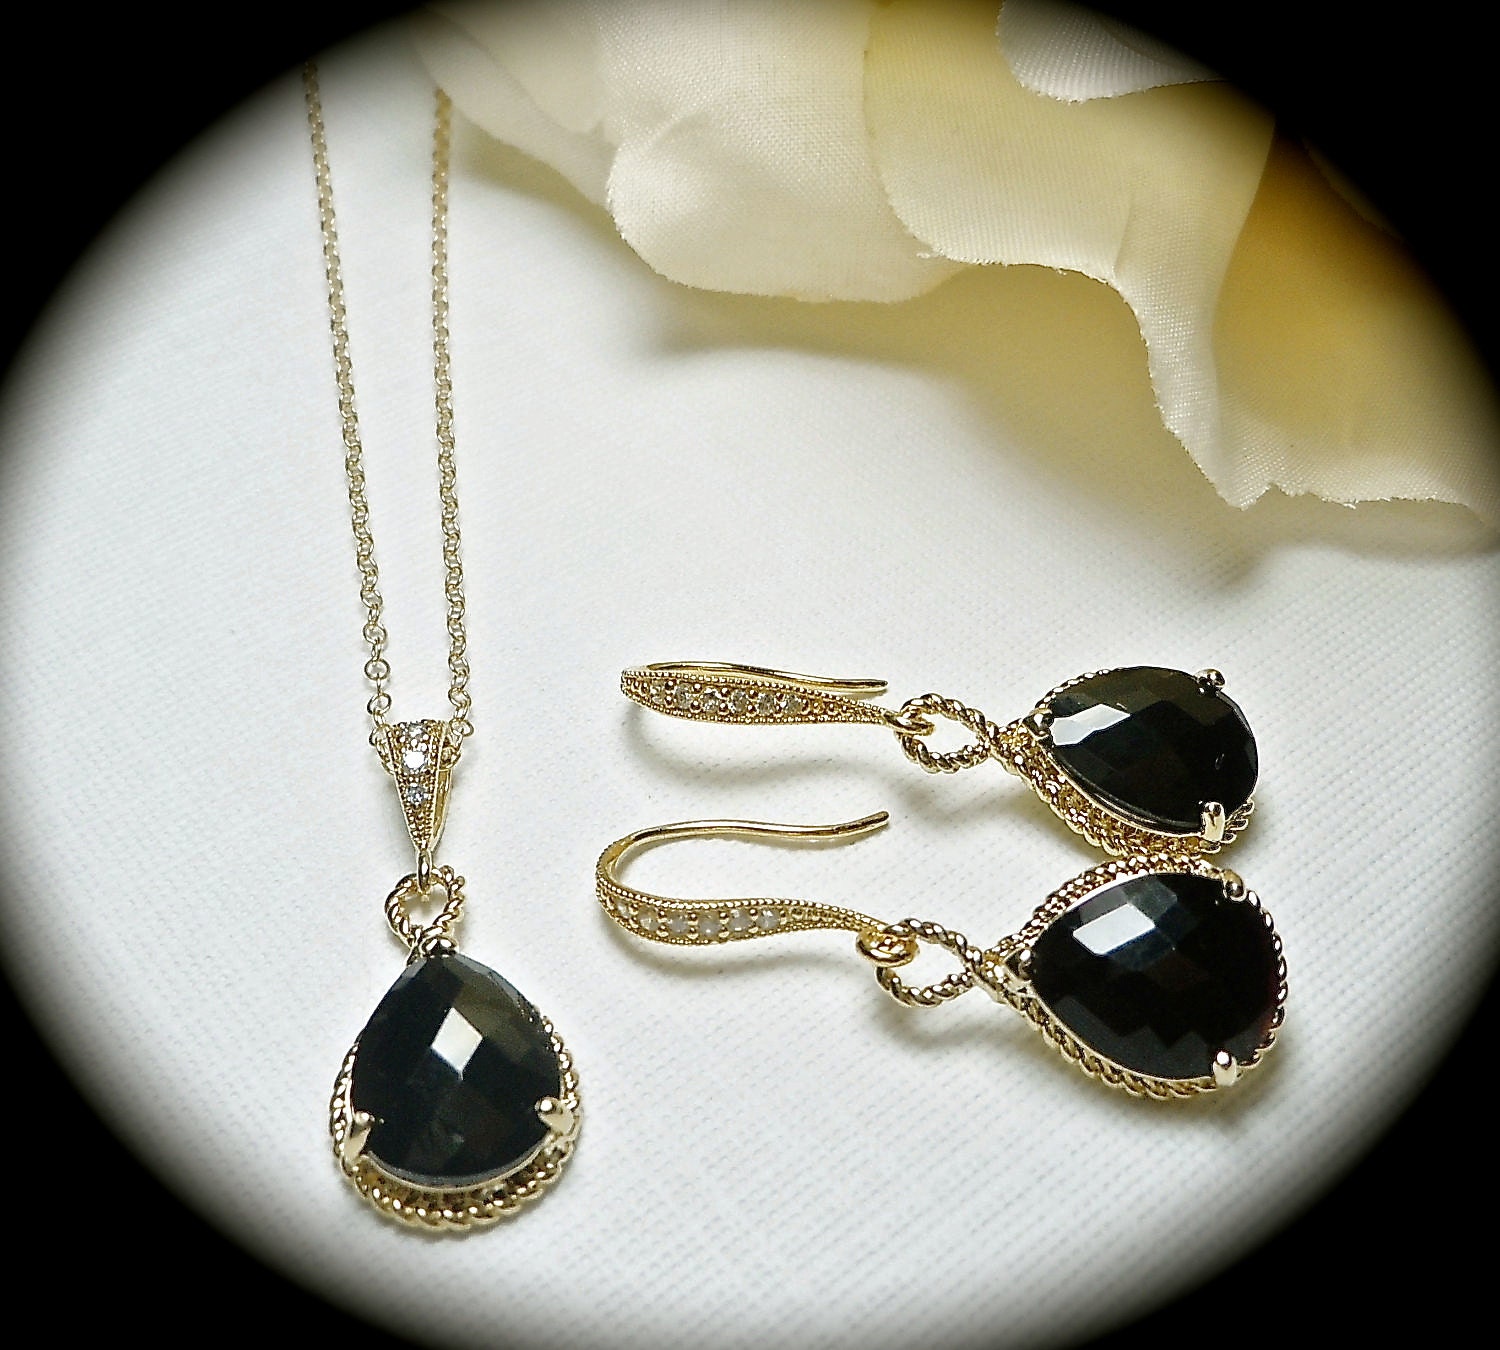 Black necklace and earring set Gold filled by QueenMeJewelryLLC